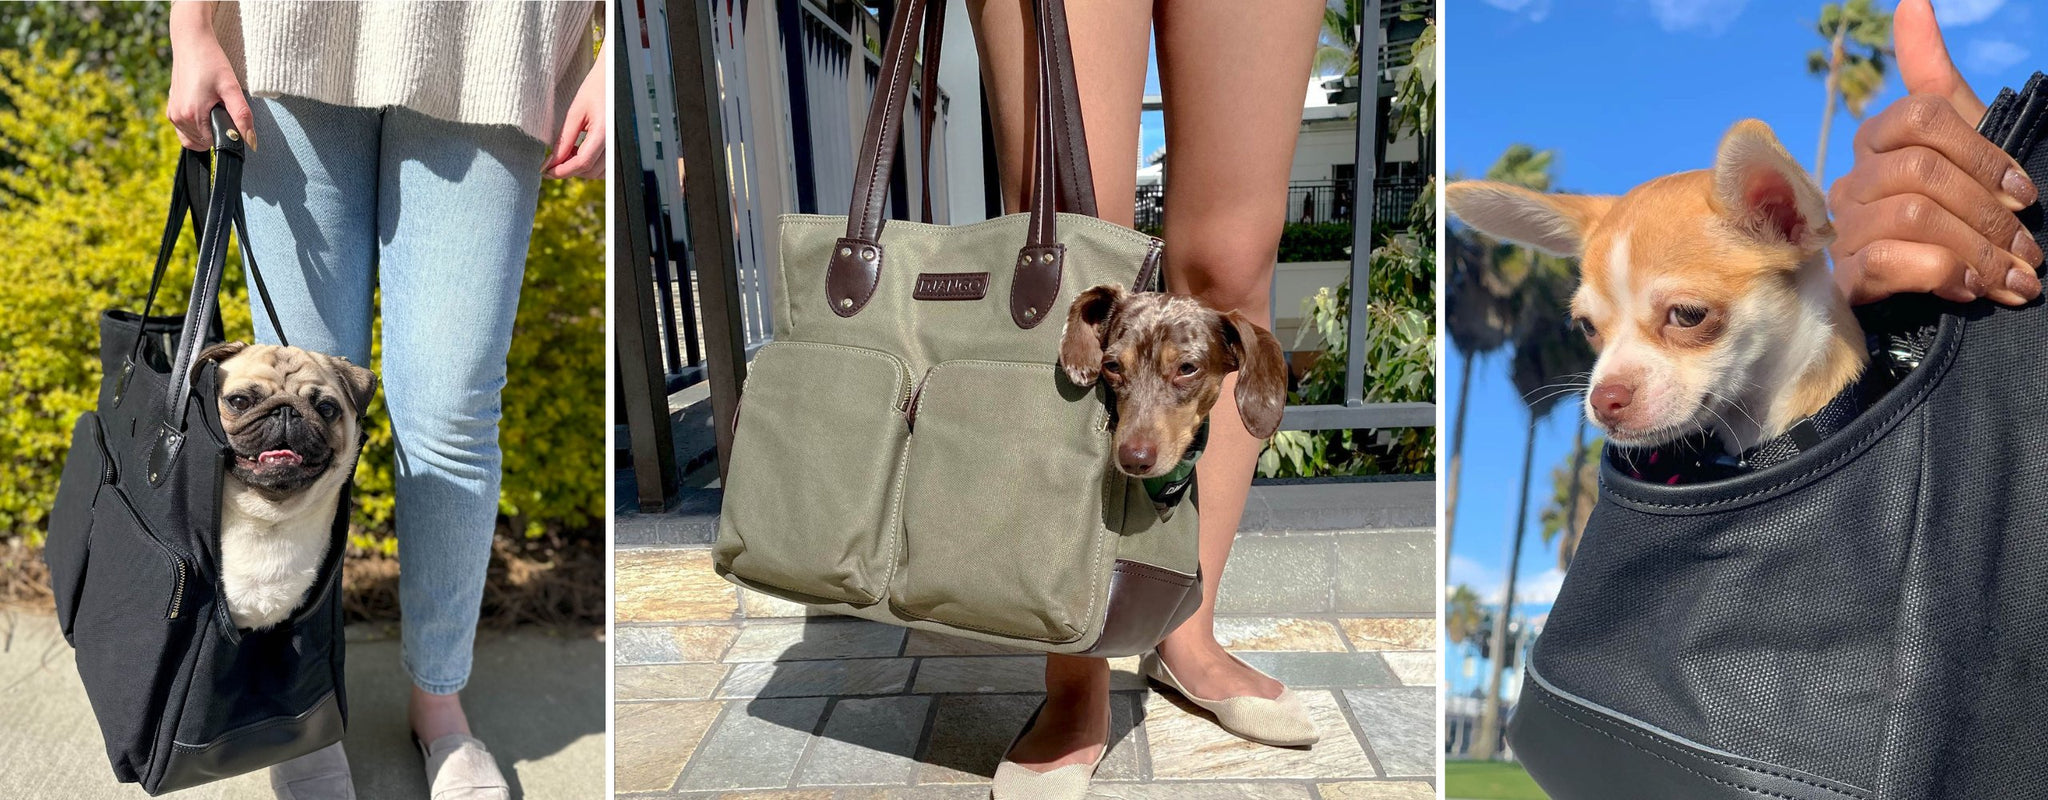 Luxury PU Leather Leather Dog Carrier Purse Fashionable Puppy Handbag For  Travel, Hiking, And Shopping Brown Large Pet Valise Purse Cat Tote Bag 245S  By ZC From Jingtou33, $100.78 | DHgate.Com